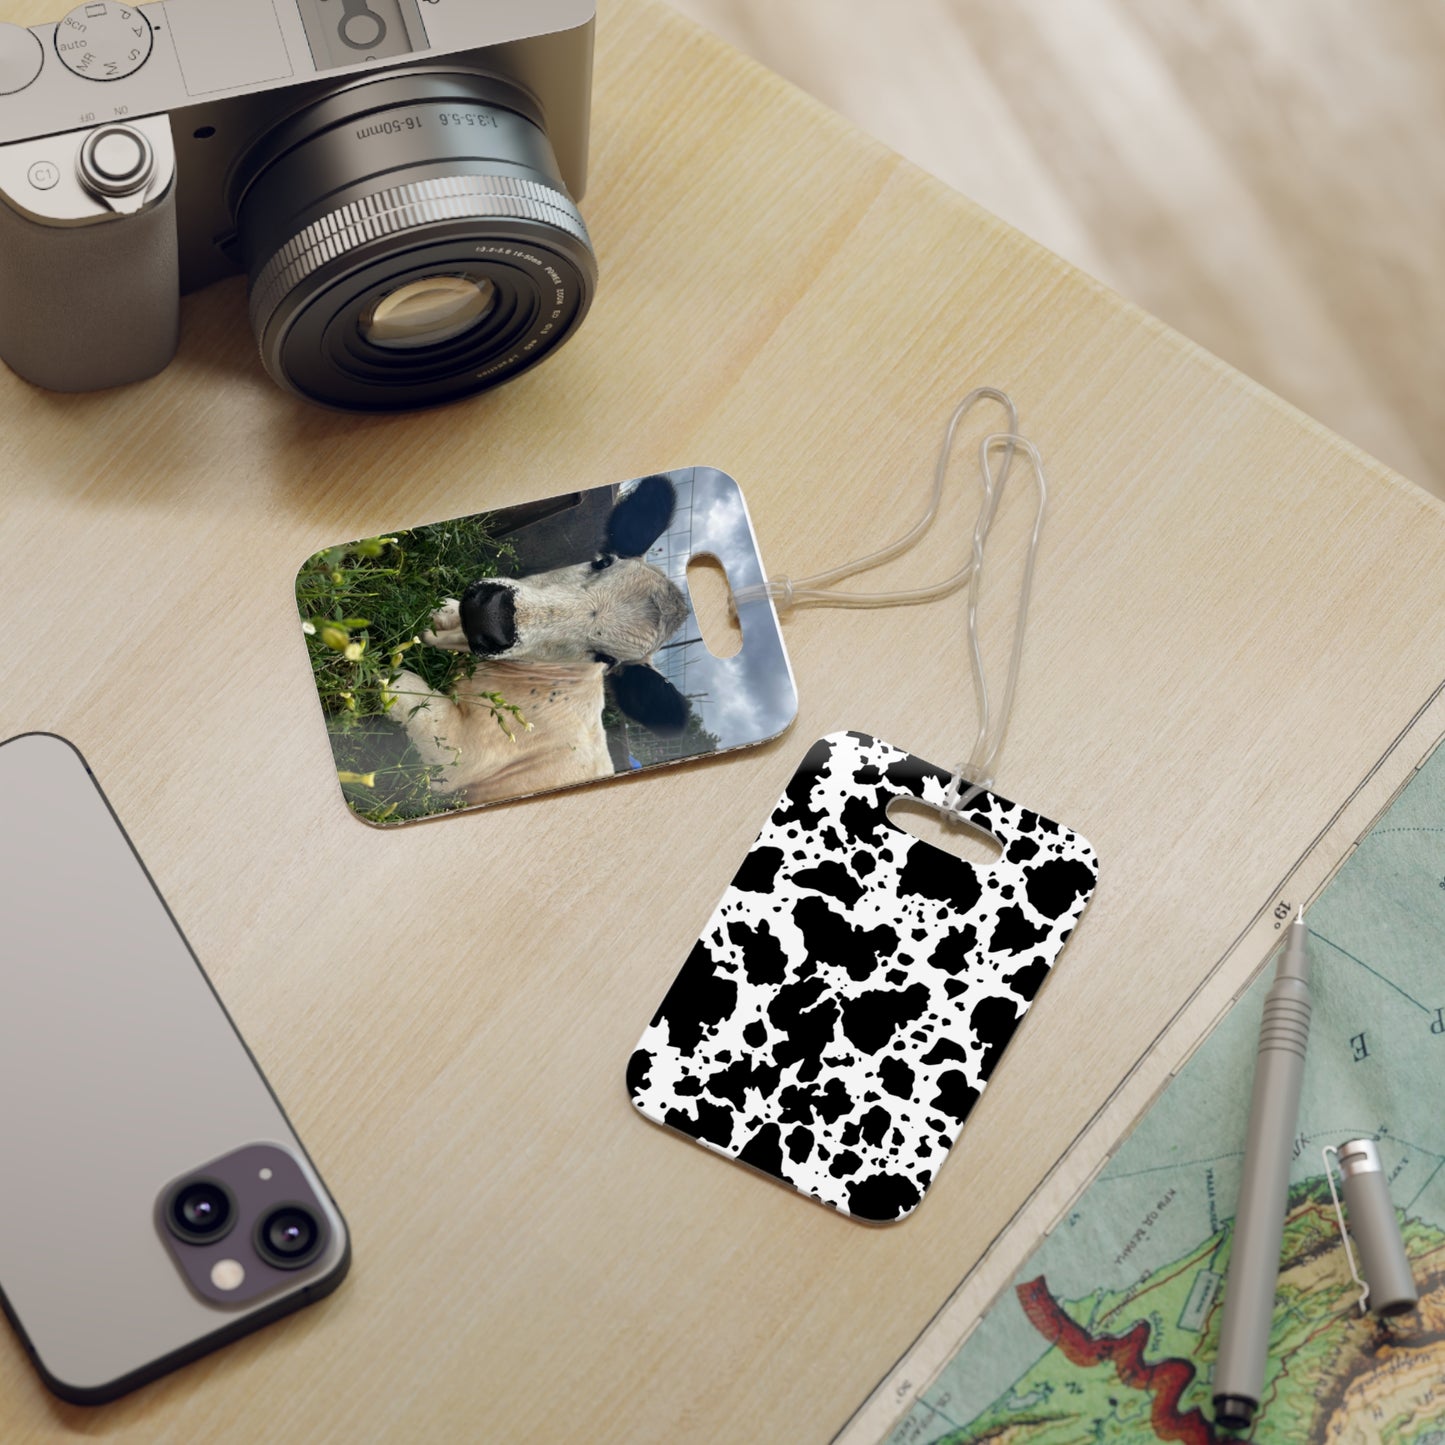 Marcy cow print Luggage Tags